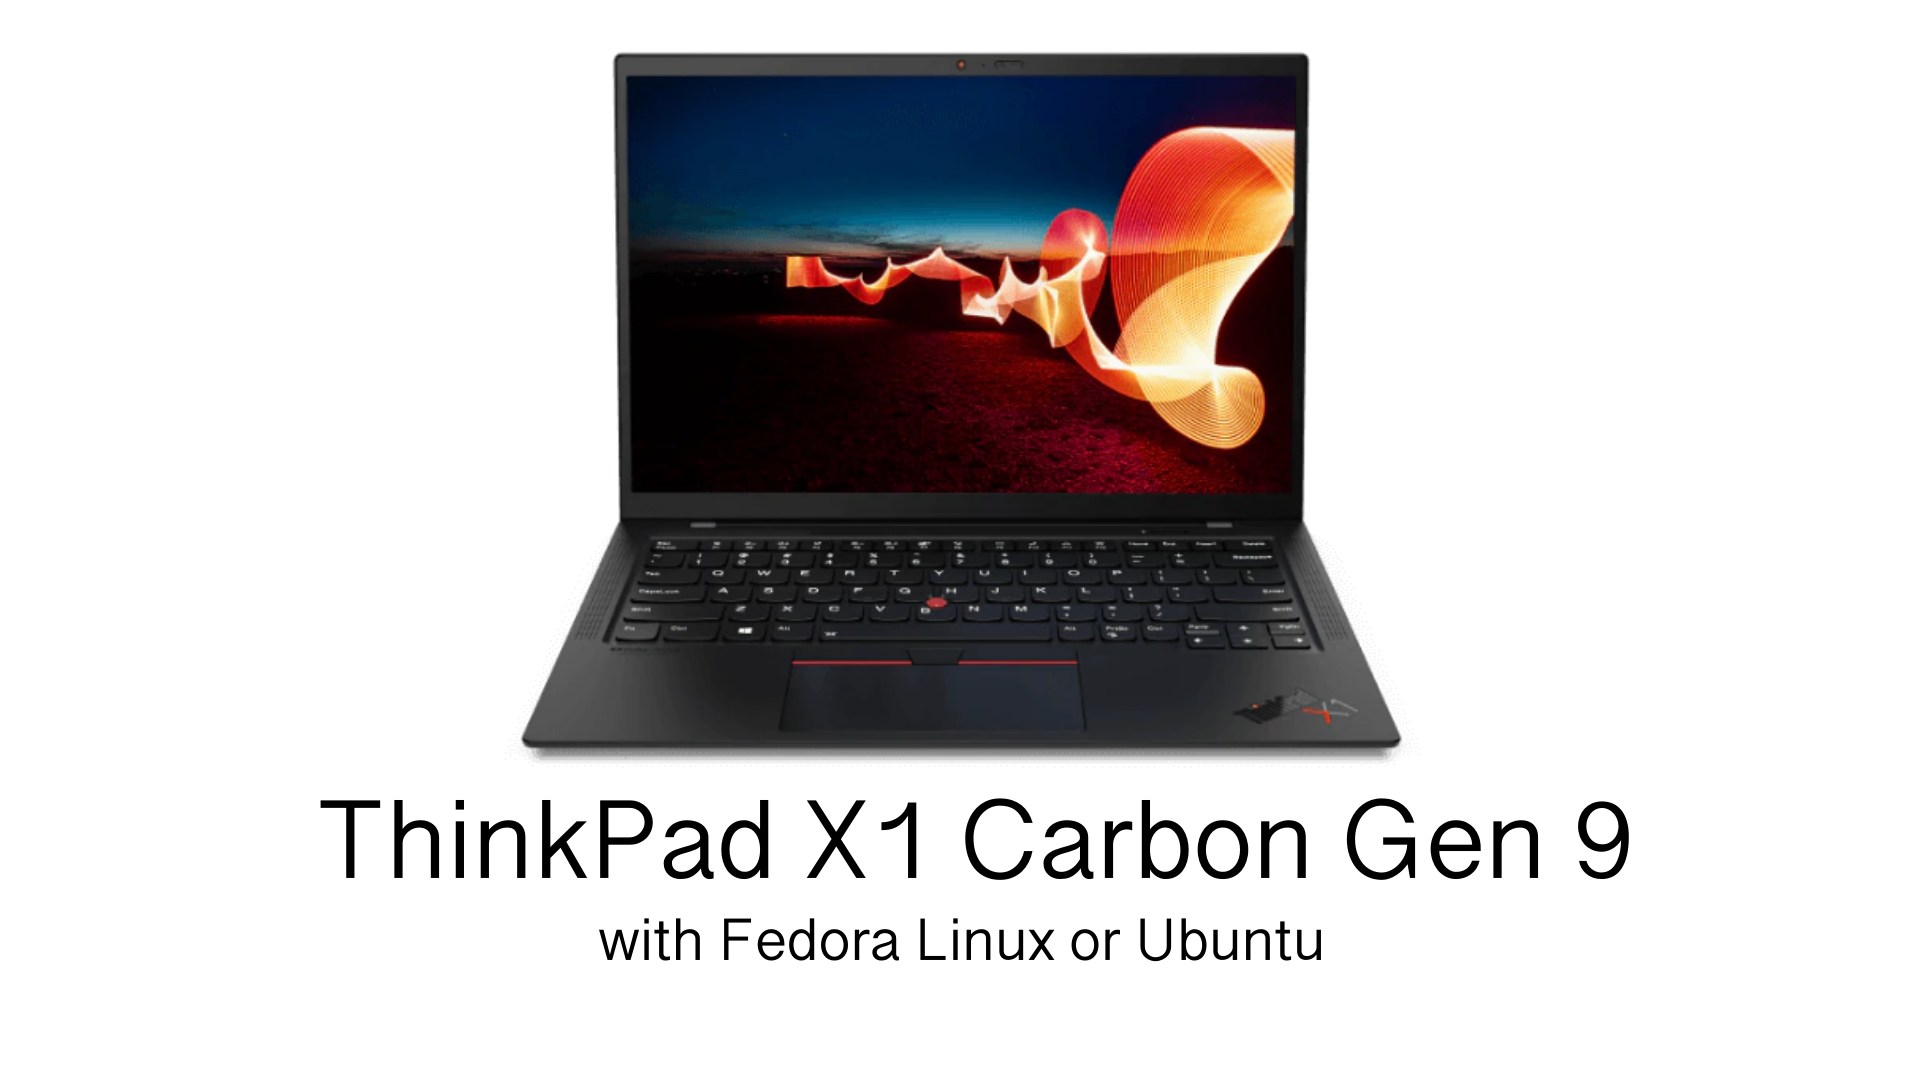 Lenovo’s ThinkPad X1 Carbon Gen 9 Laptop Now Comes with Fedora Linux or Ubuntu